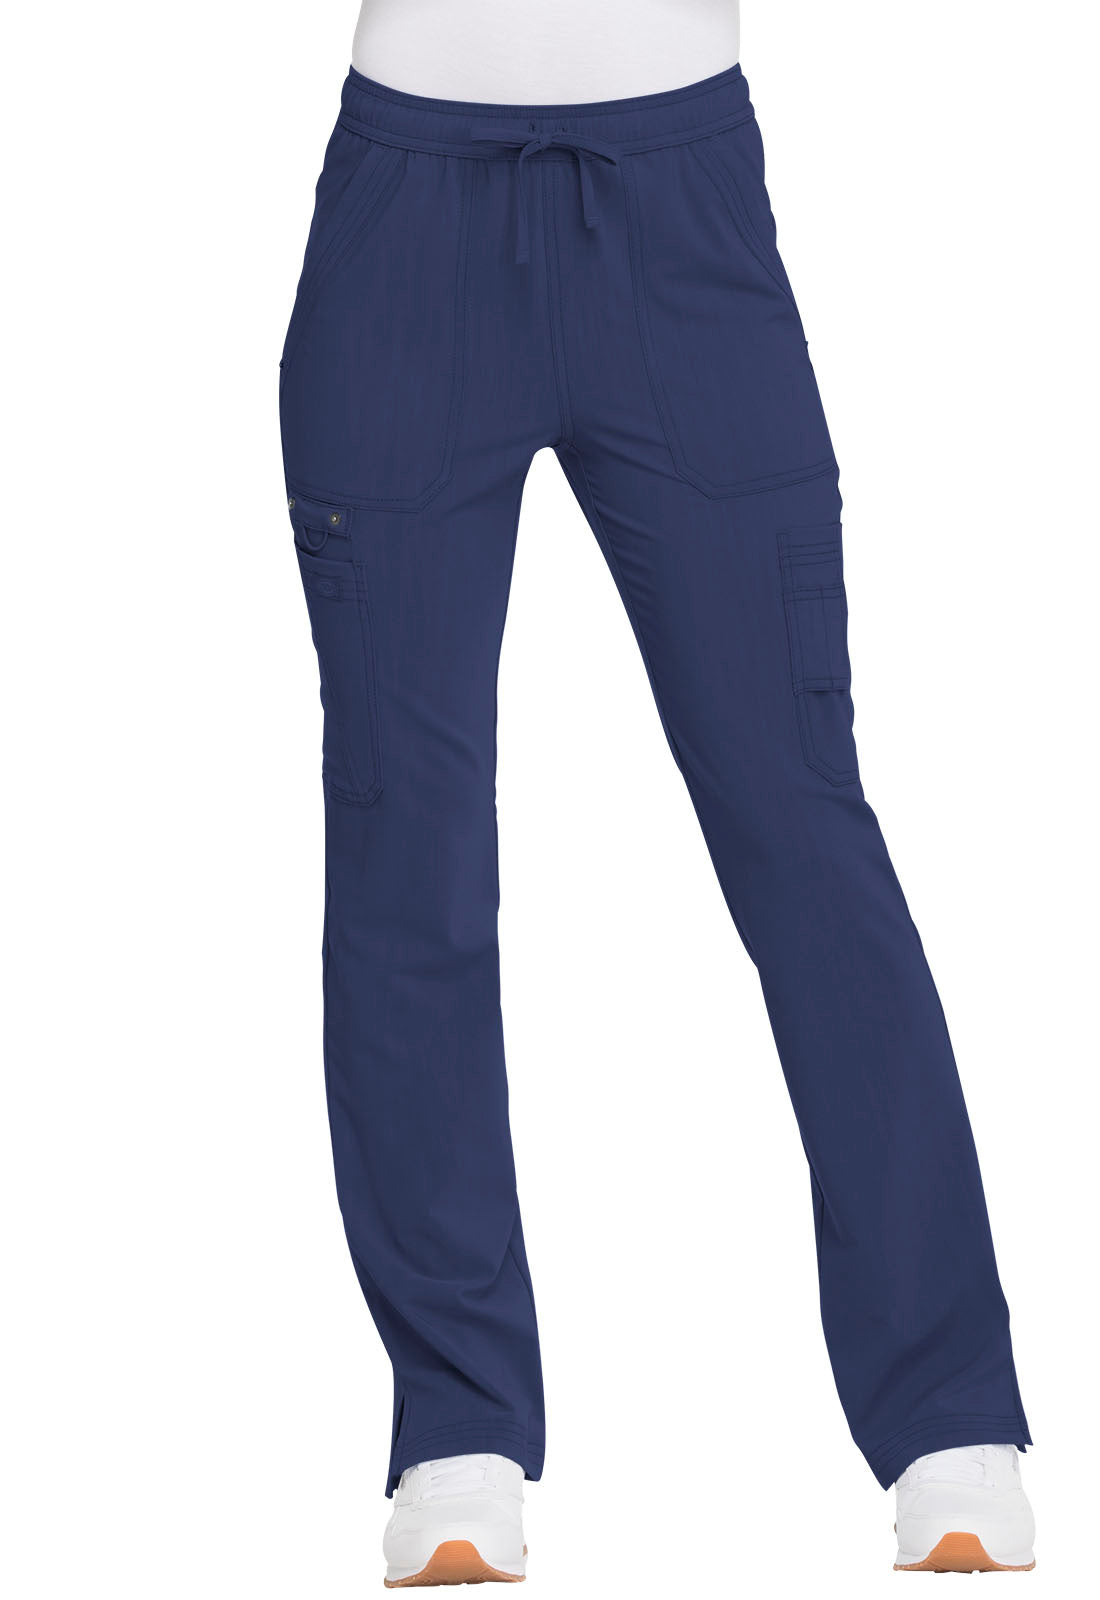 OUT Conj. Qx. Mujer Dickies Advance DK755/DK200 Navy